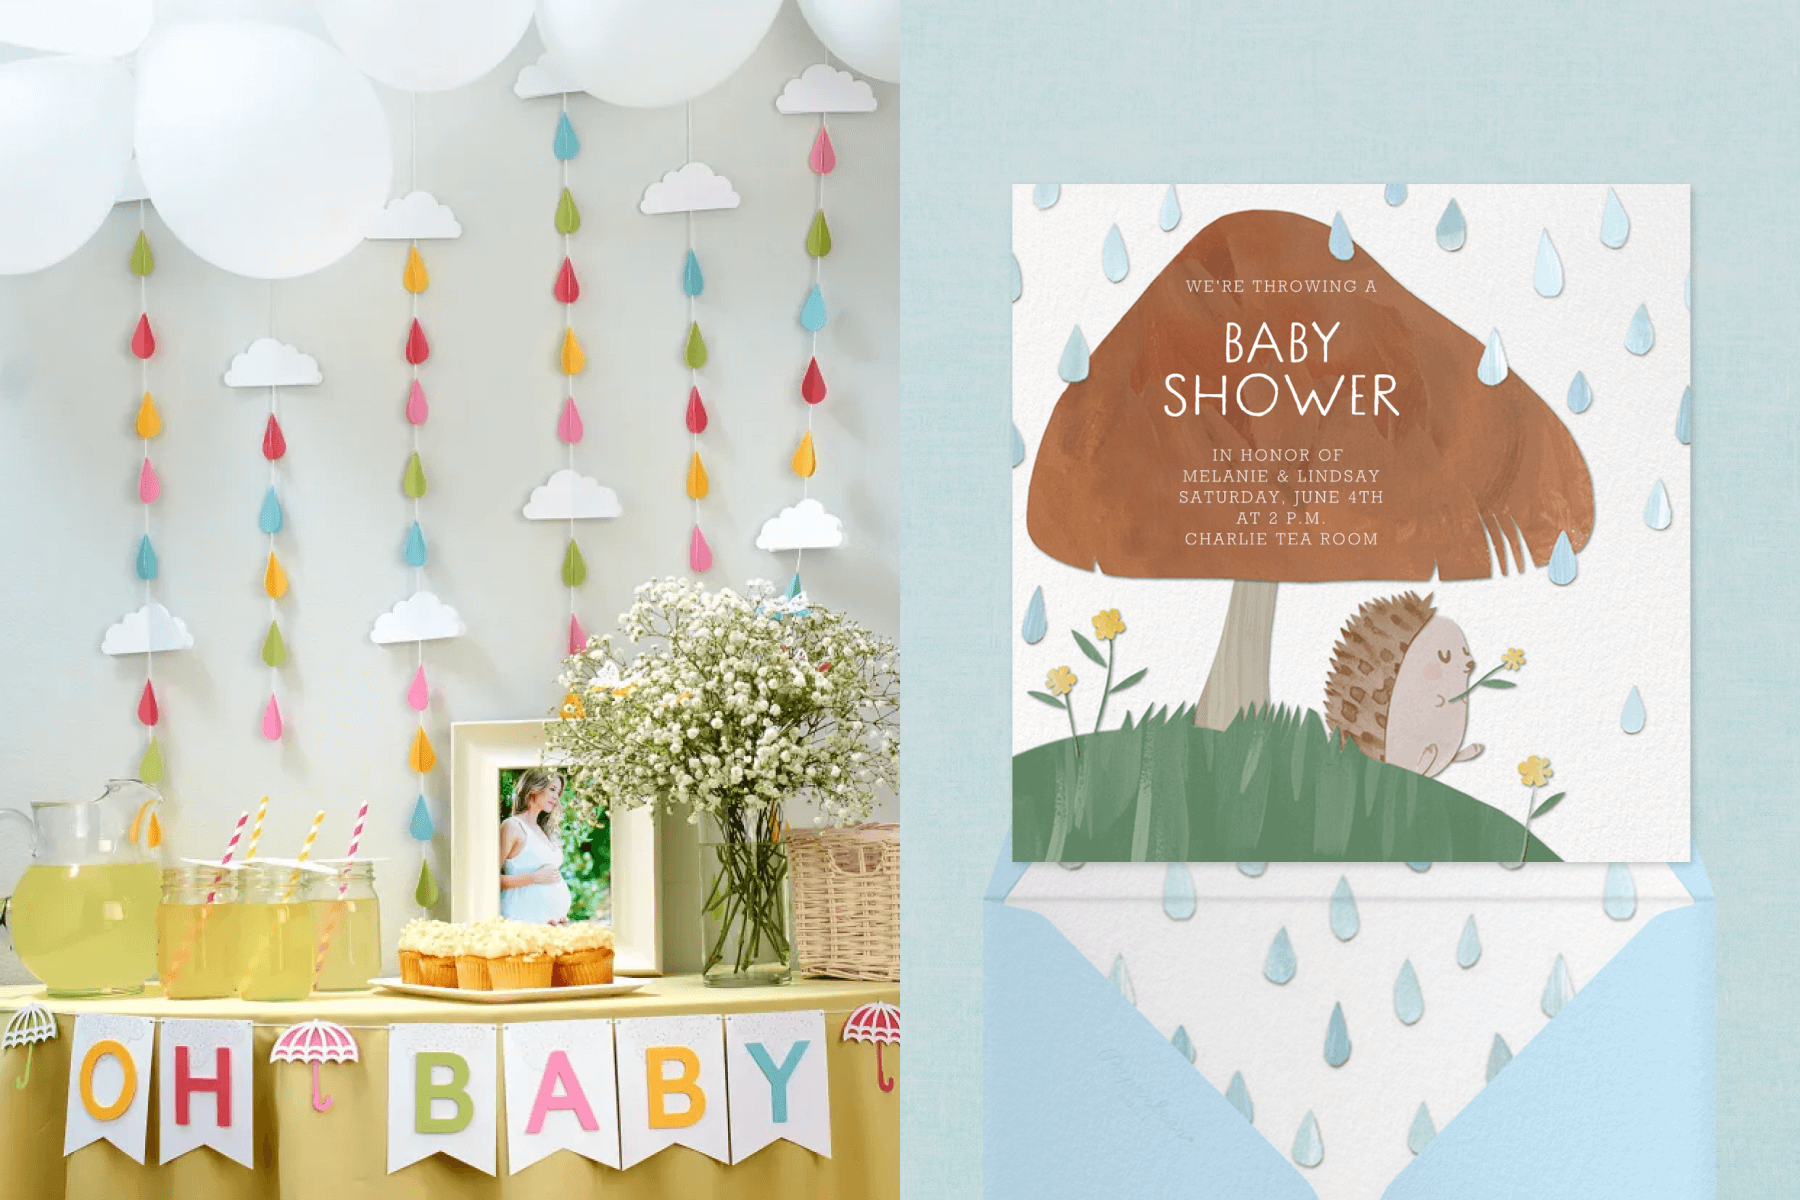 Left: Colorful cloud and raindrop wall decorations at a baby shower. Right: An invitation with a small paper cutout hedgehog under a mushroom in a rain shower. 